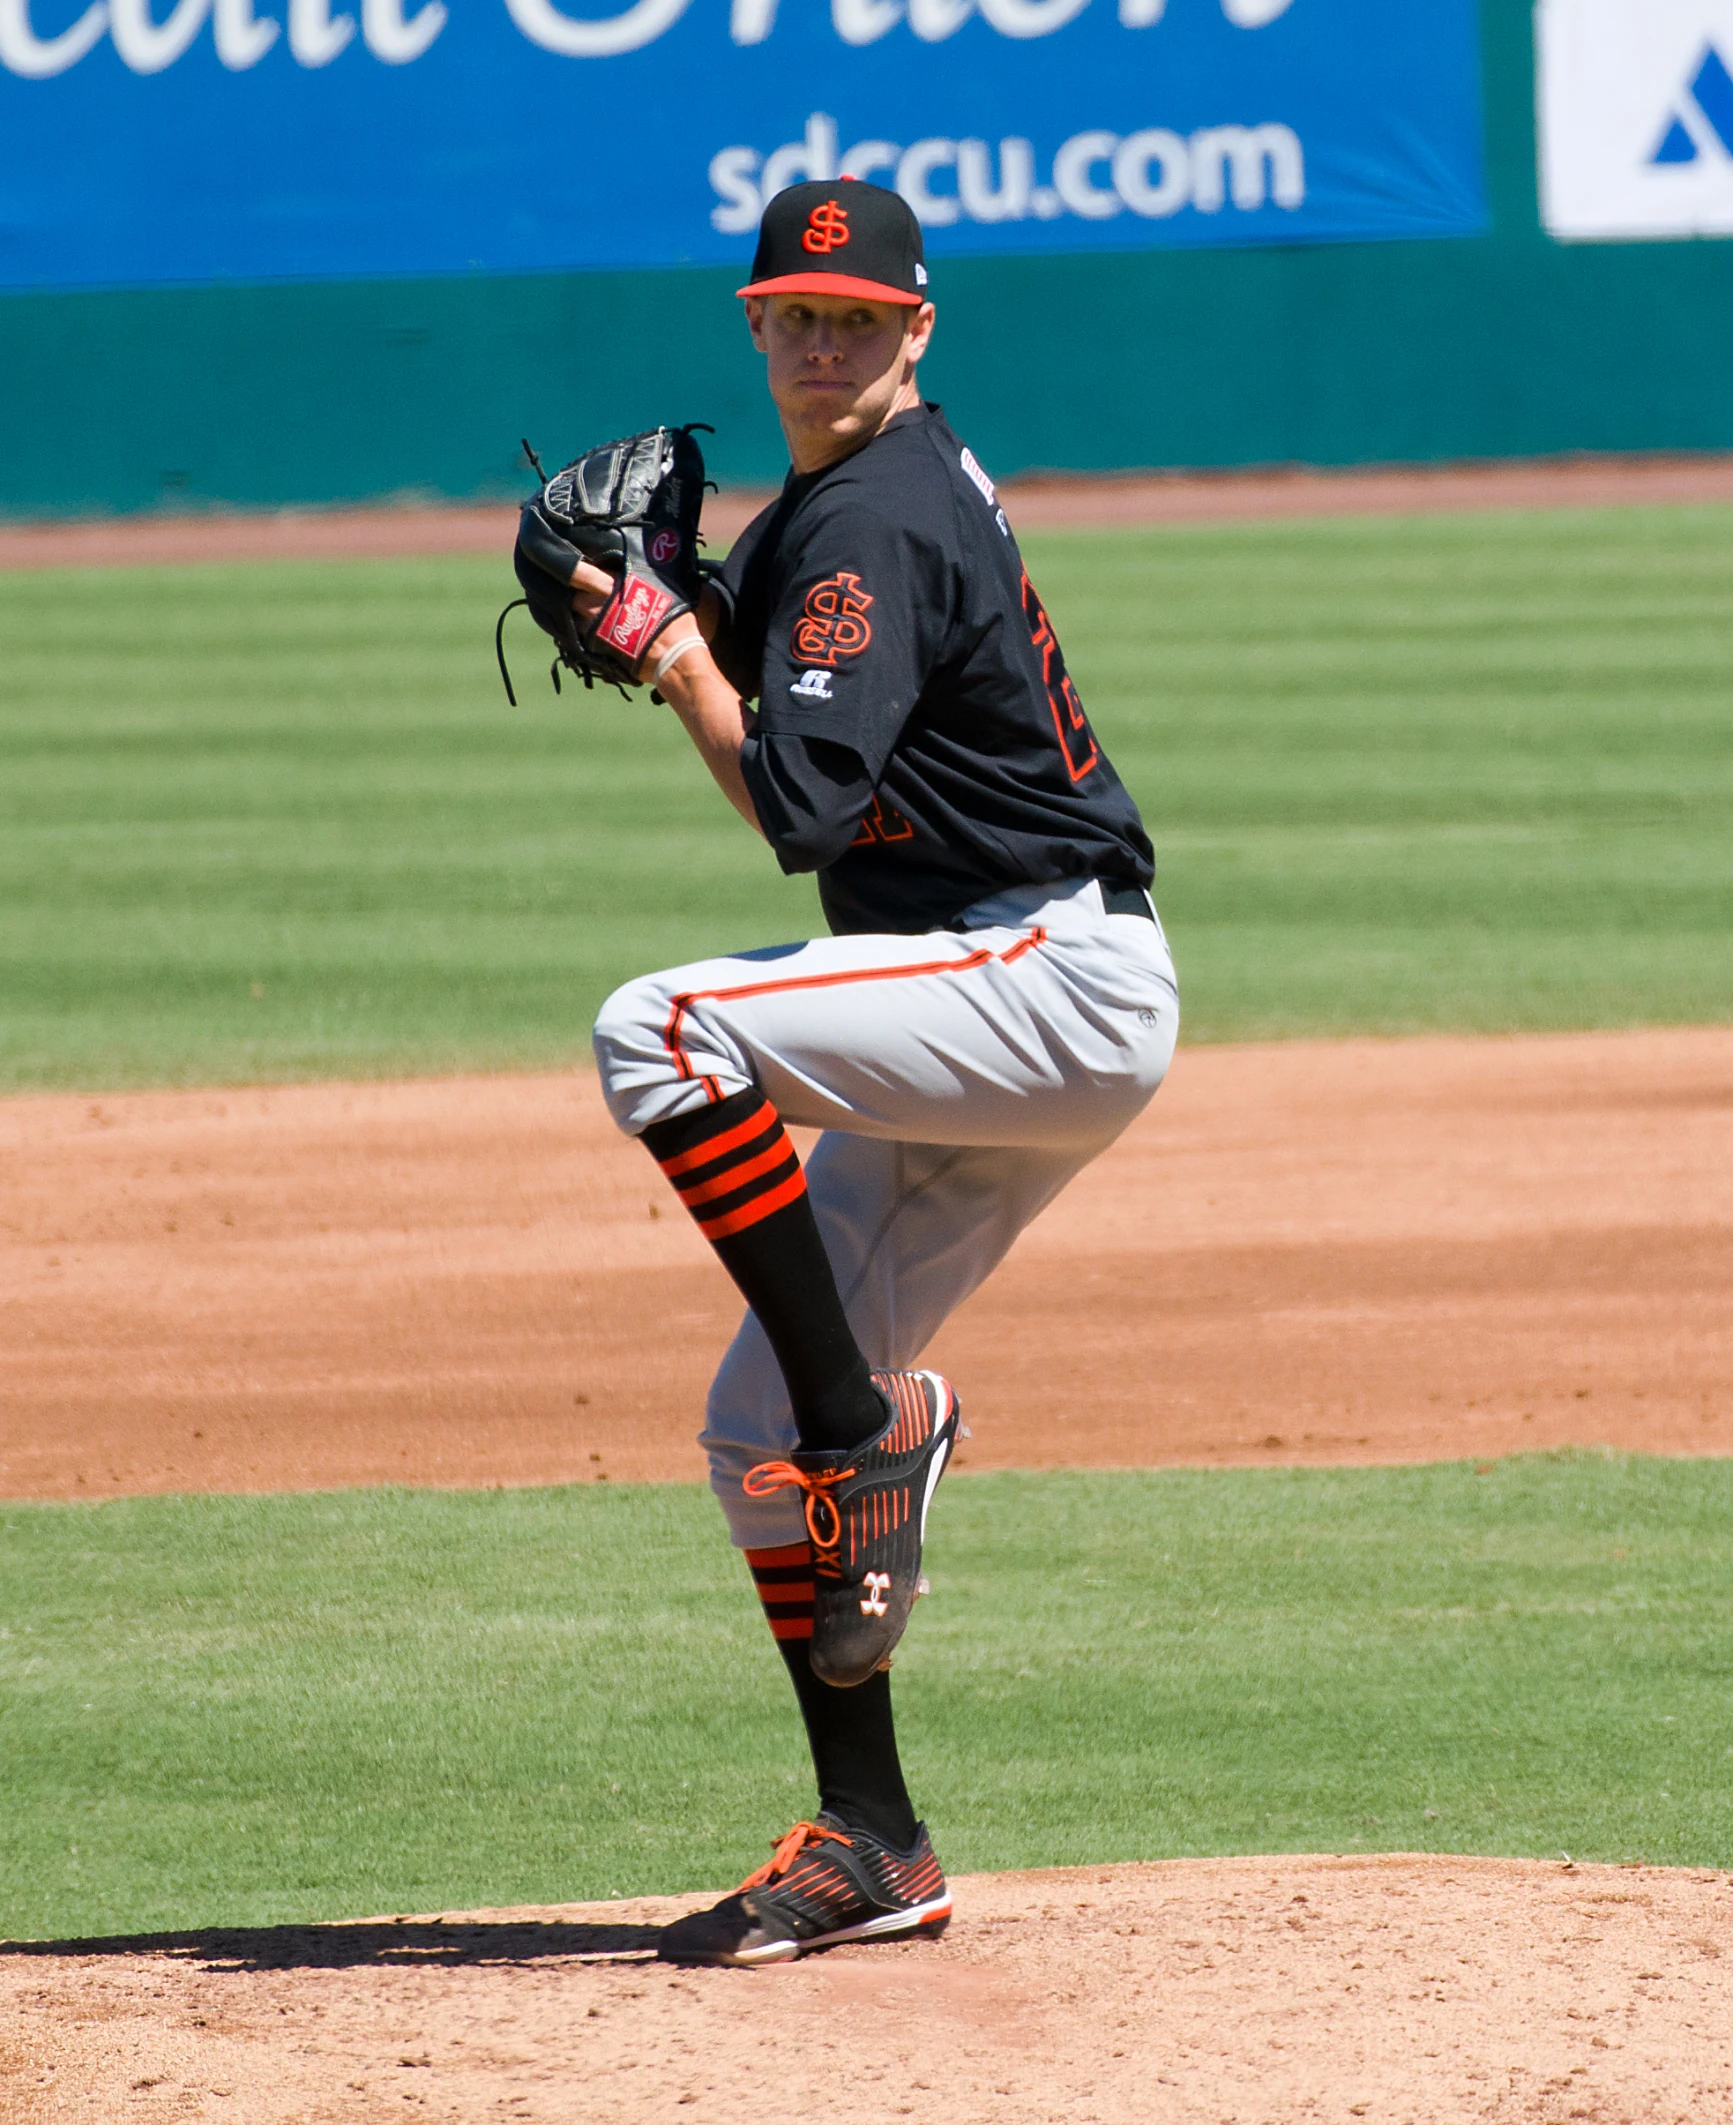 a baseball player about to throw a ball during a game